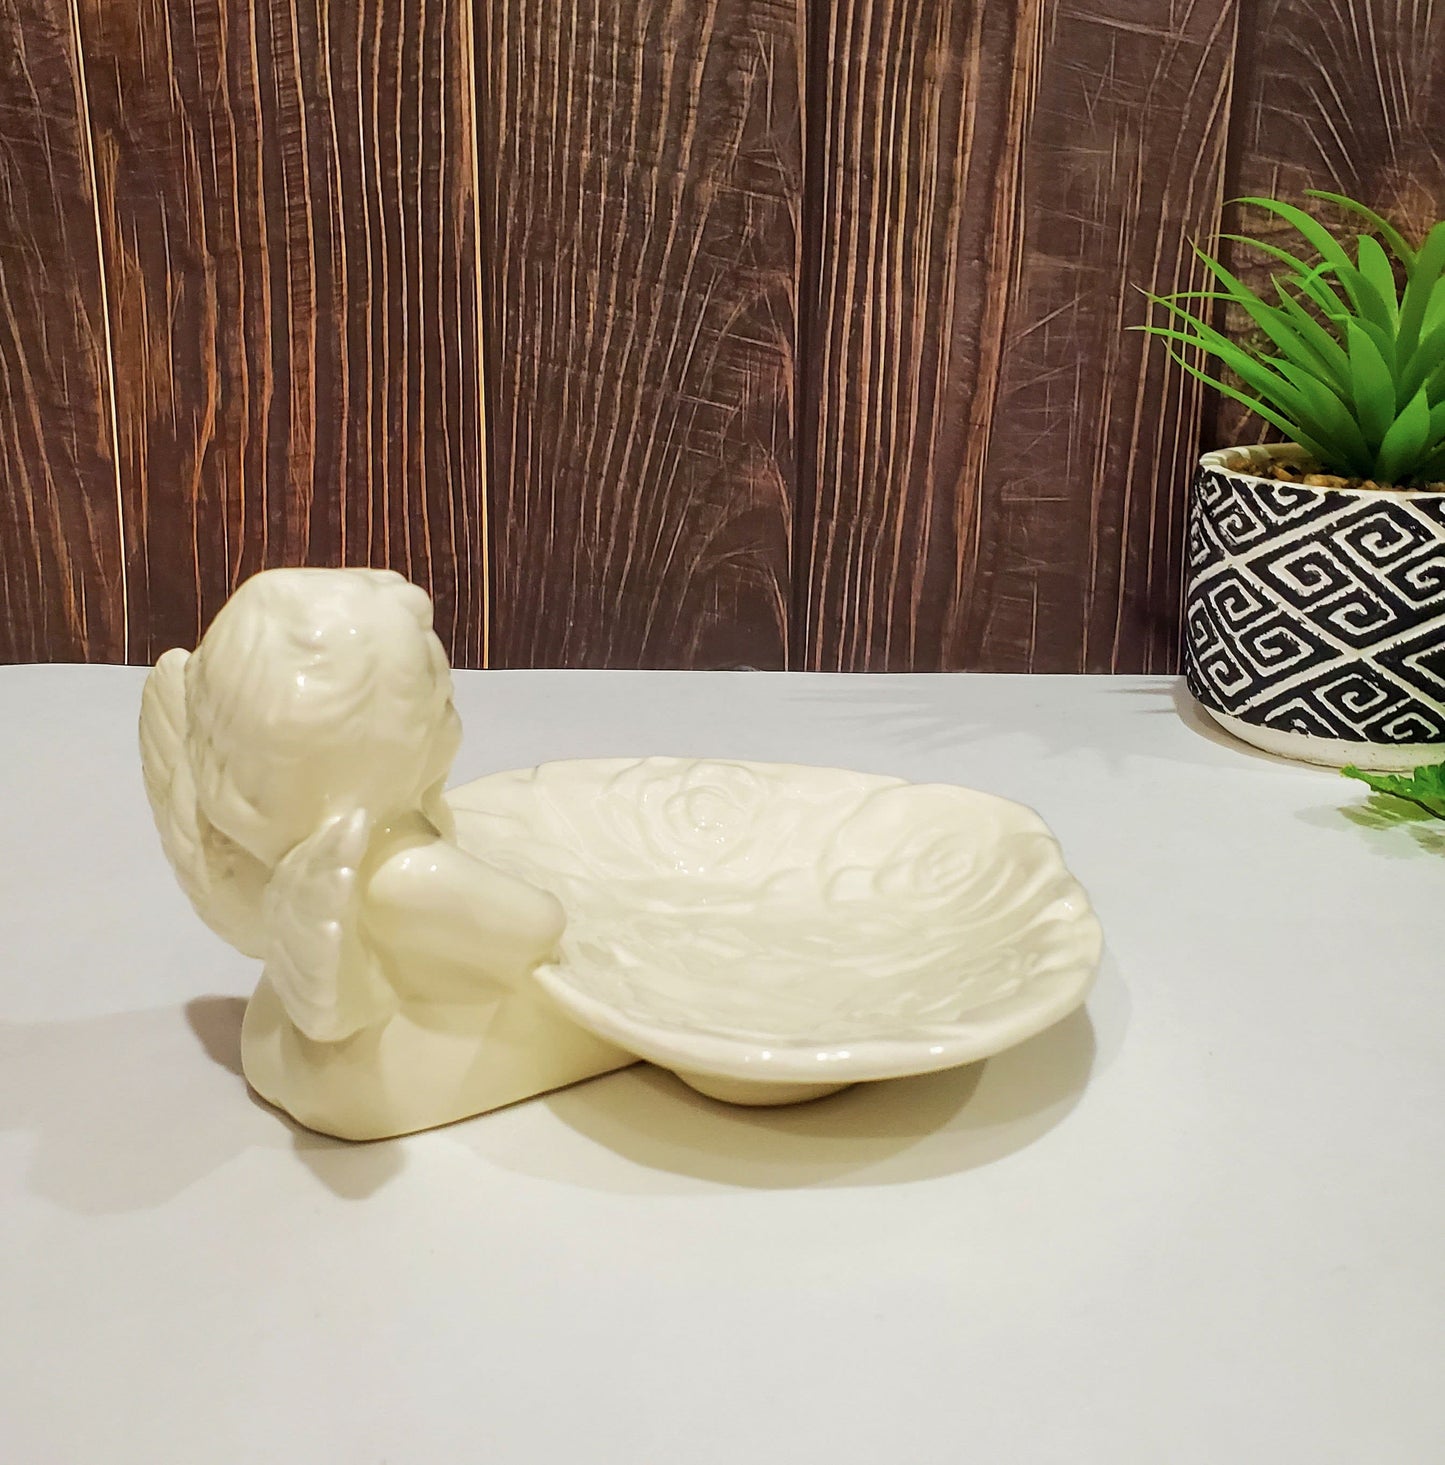 Cherub Angel Heart Shaped Candy or Soap Dish - Vintage New by World Bazaars Inc